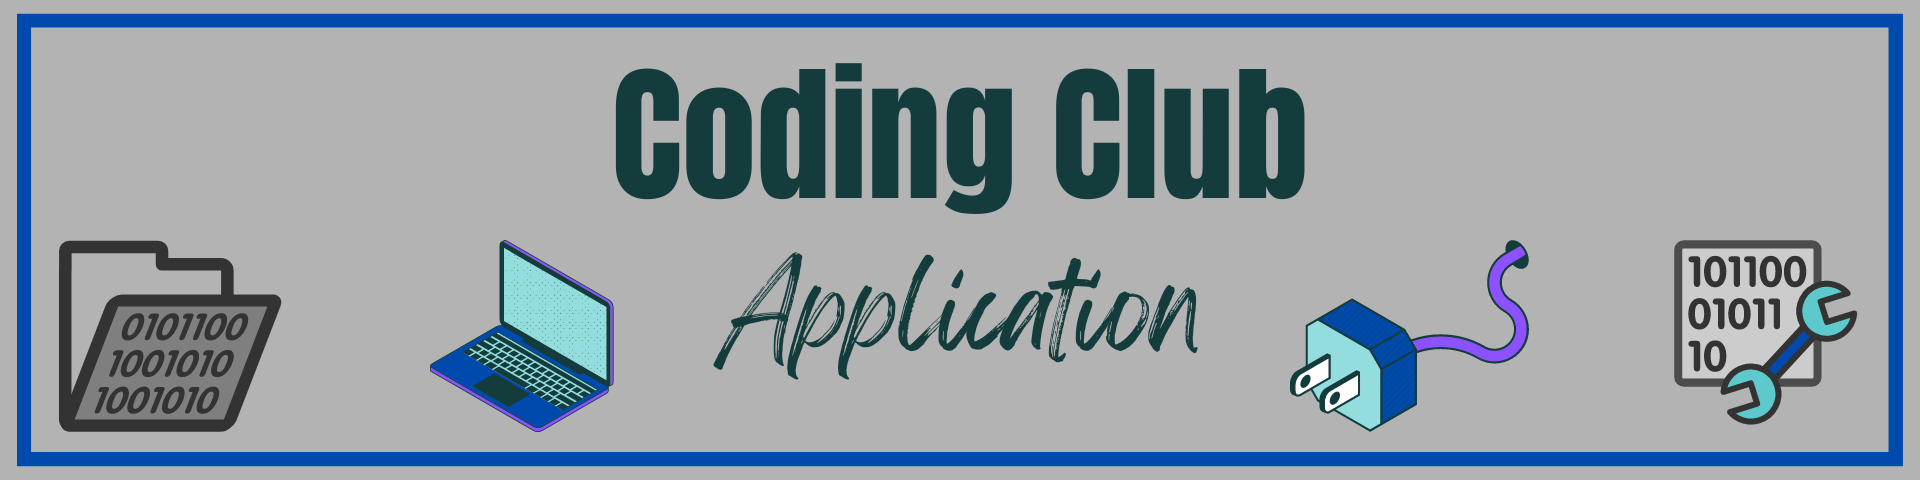 Coding Club Application and Information